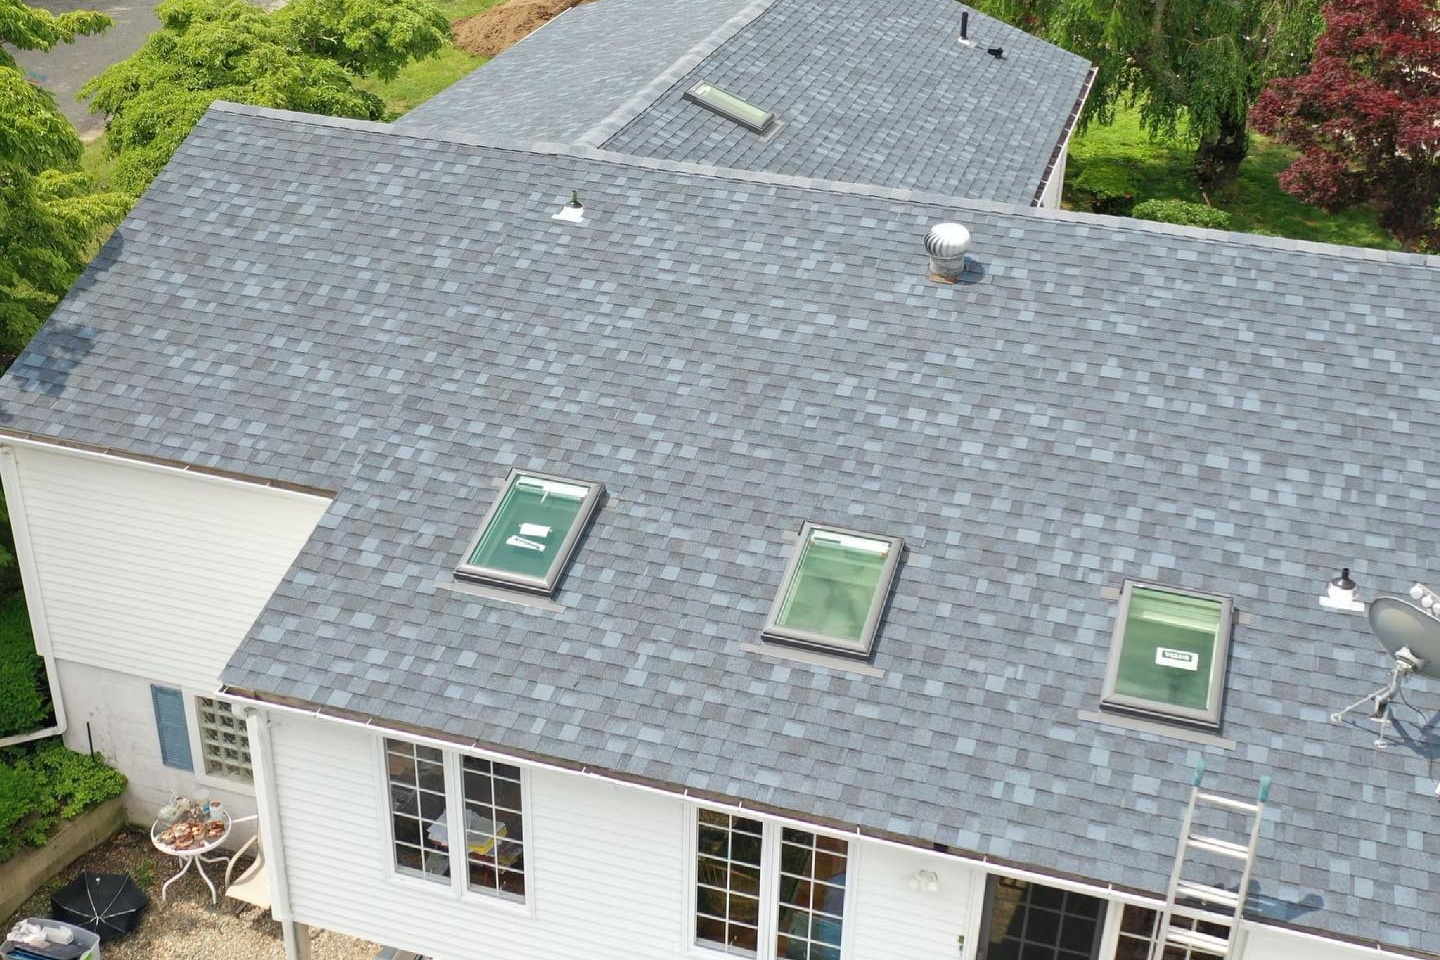 Norwich CT Roof Replacement 2 BP Builder Company in CT | Roofer, Roof Replacement, CT Roofing Company & General Contractor CT